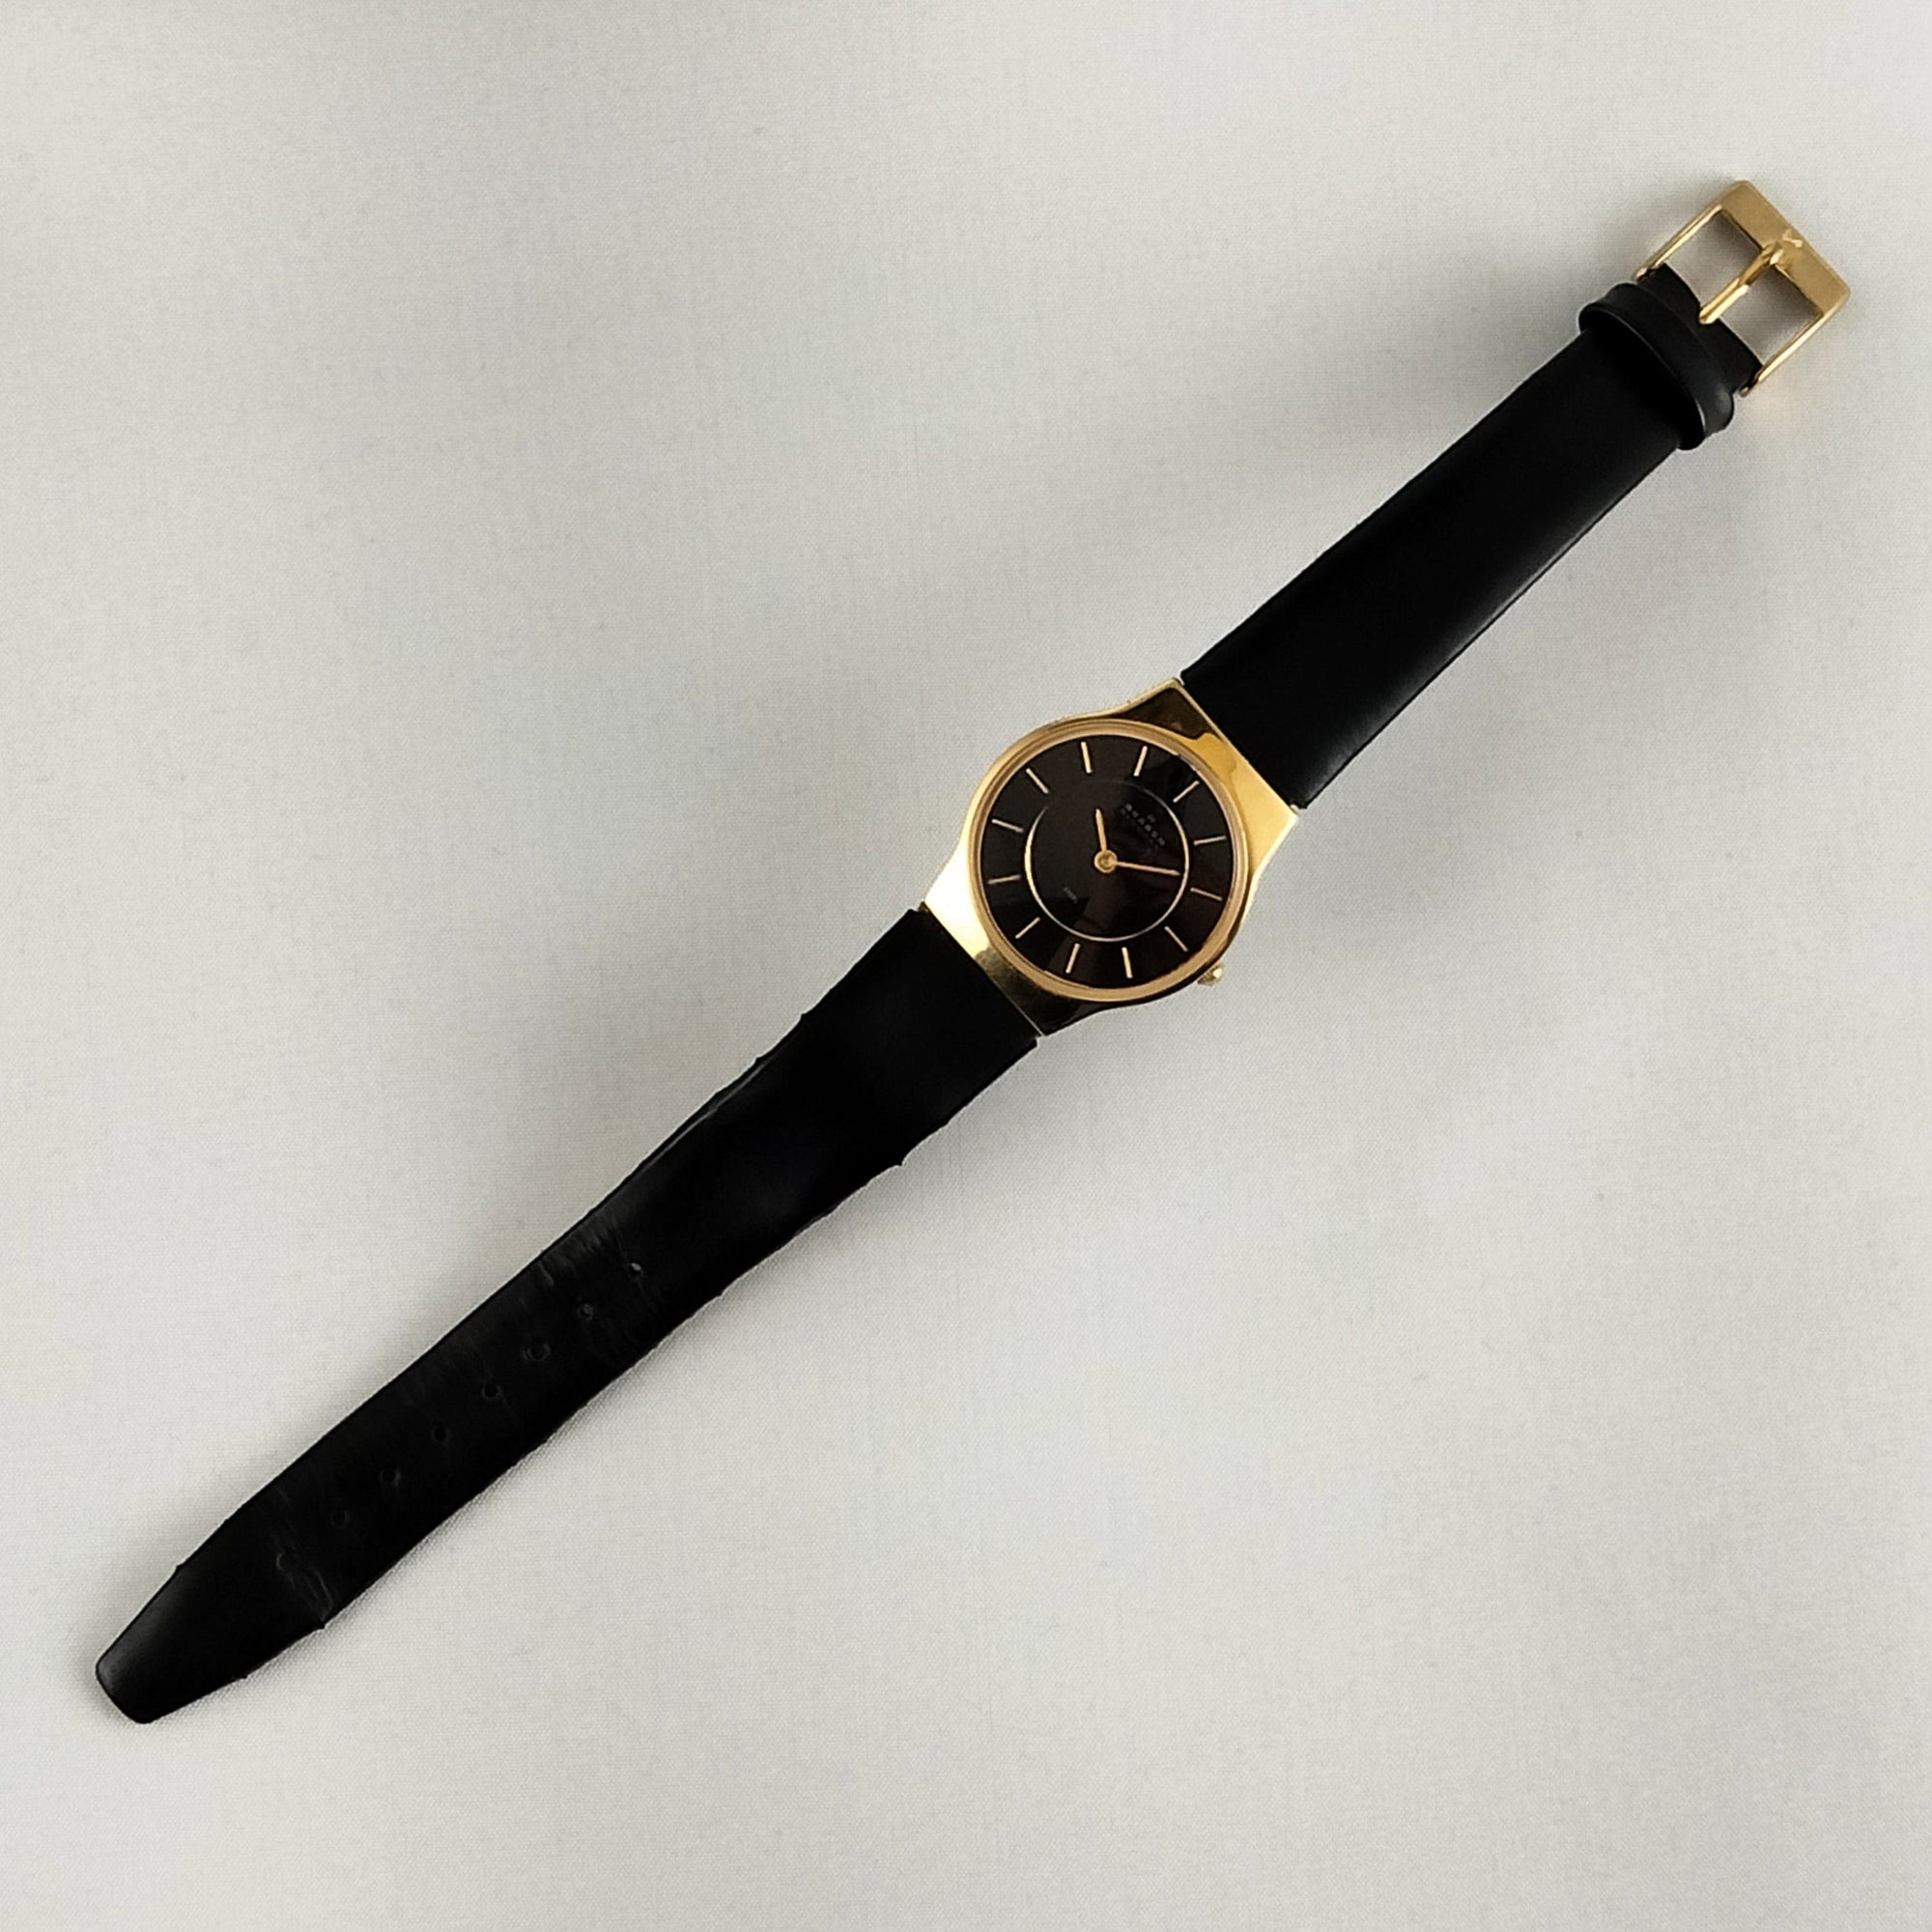 I Like Mikes Mid Century Modern Watches Skagen Unisex Stainless Steel Gold Tone Watch, Black Dial, Black Genuine Leather Strap